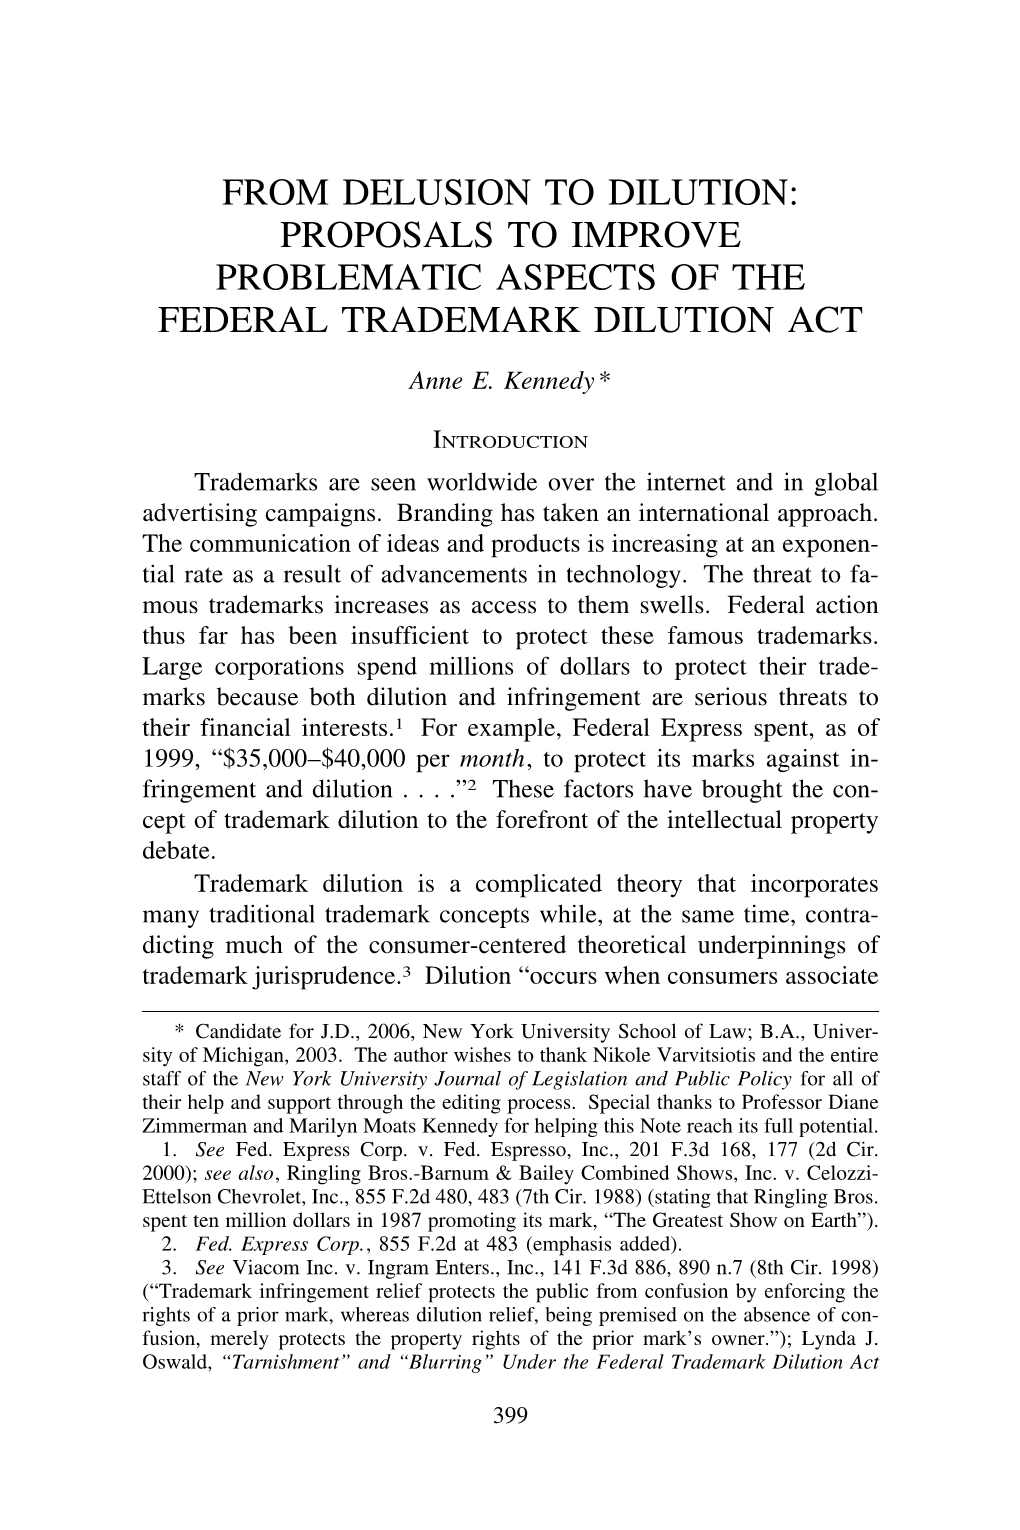 From Delusion to Dilution: Proposals to Improve Problematic Aspects of the Federal Trademark Dilution Act